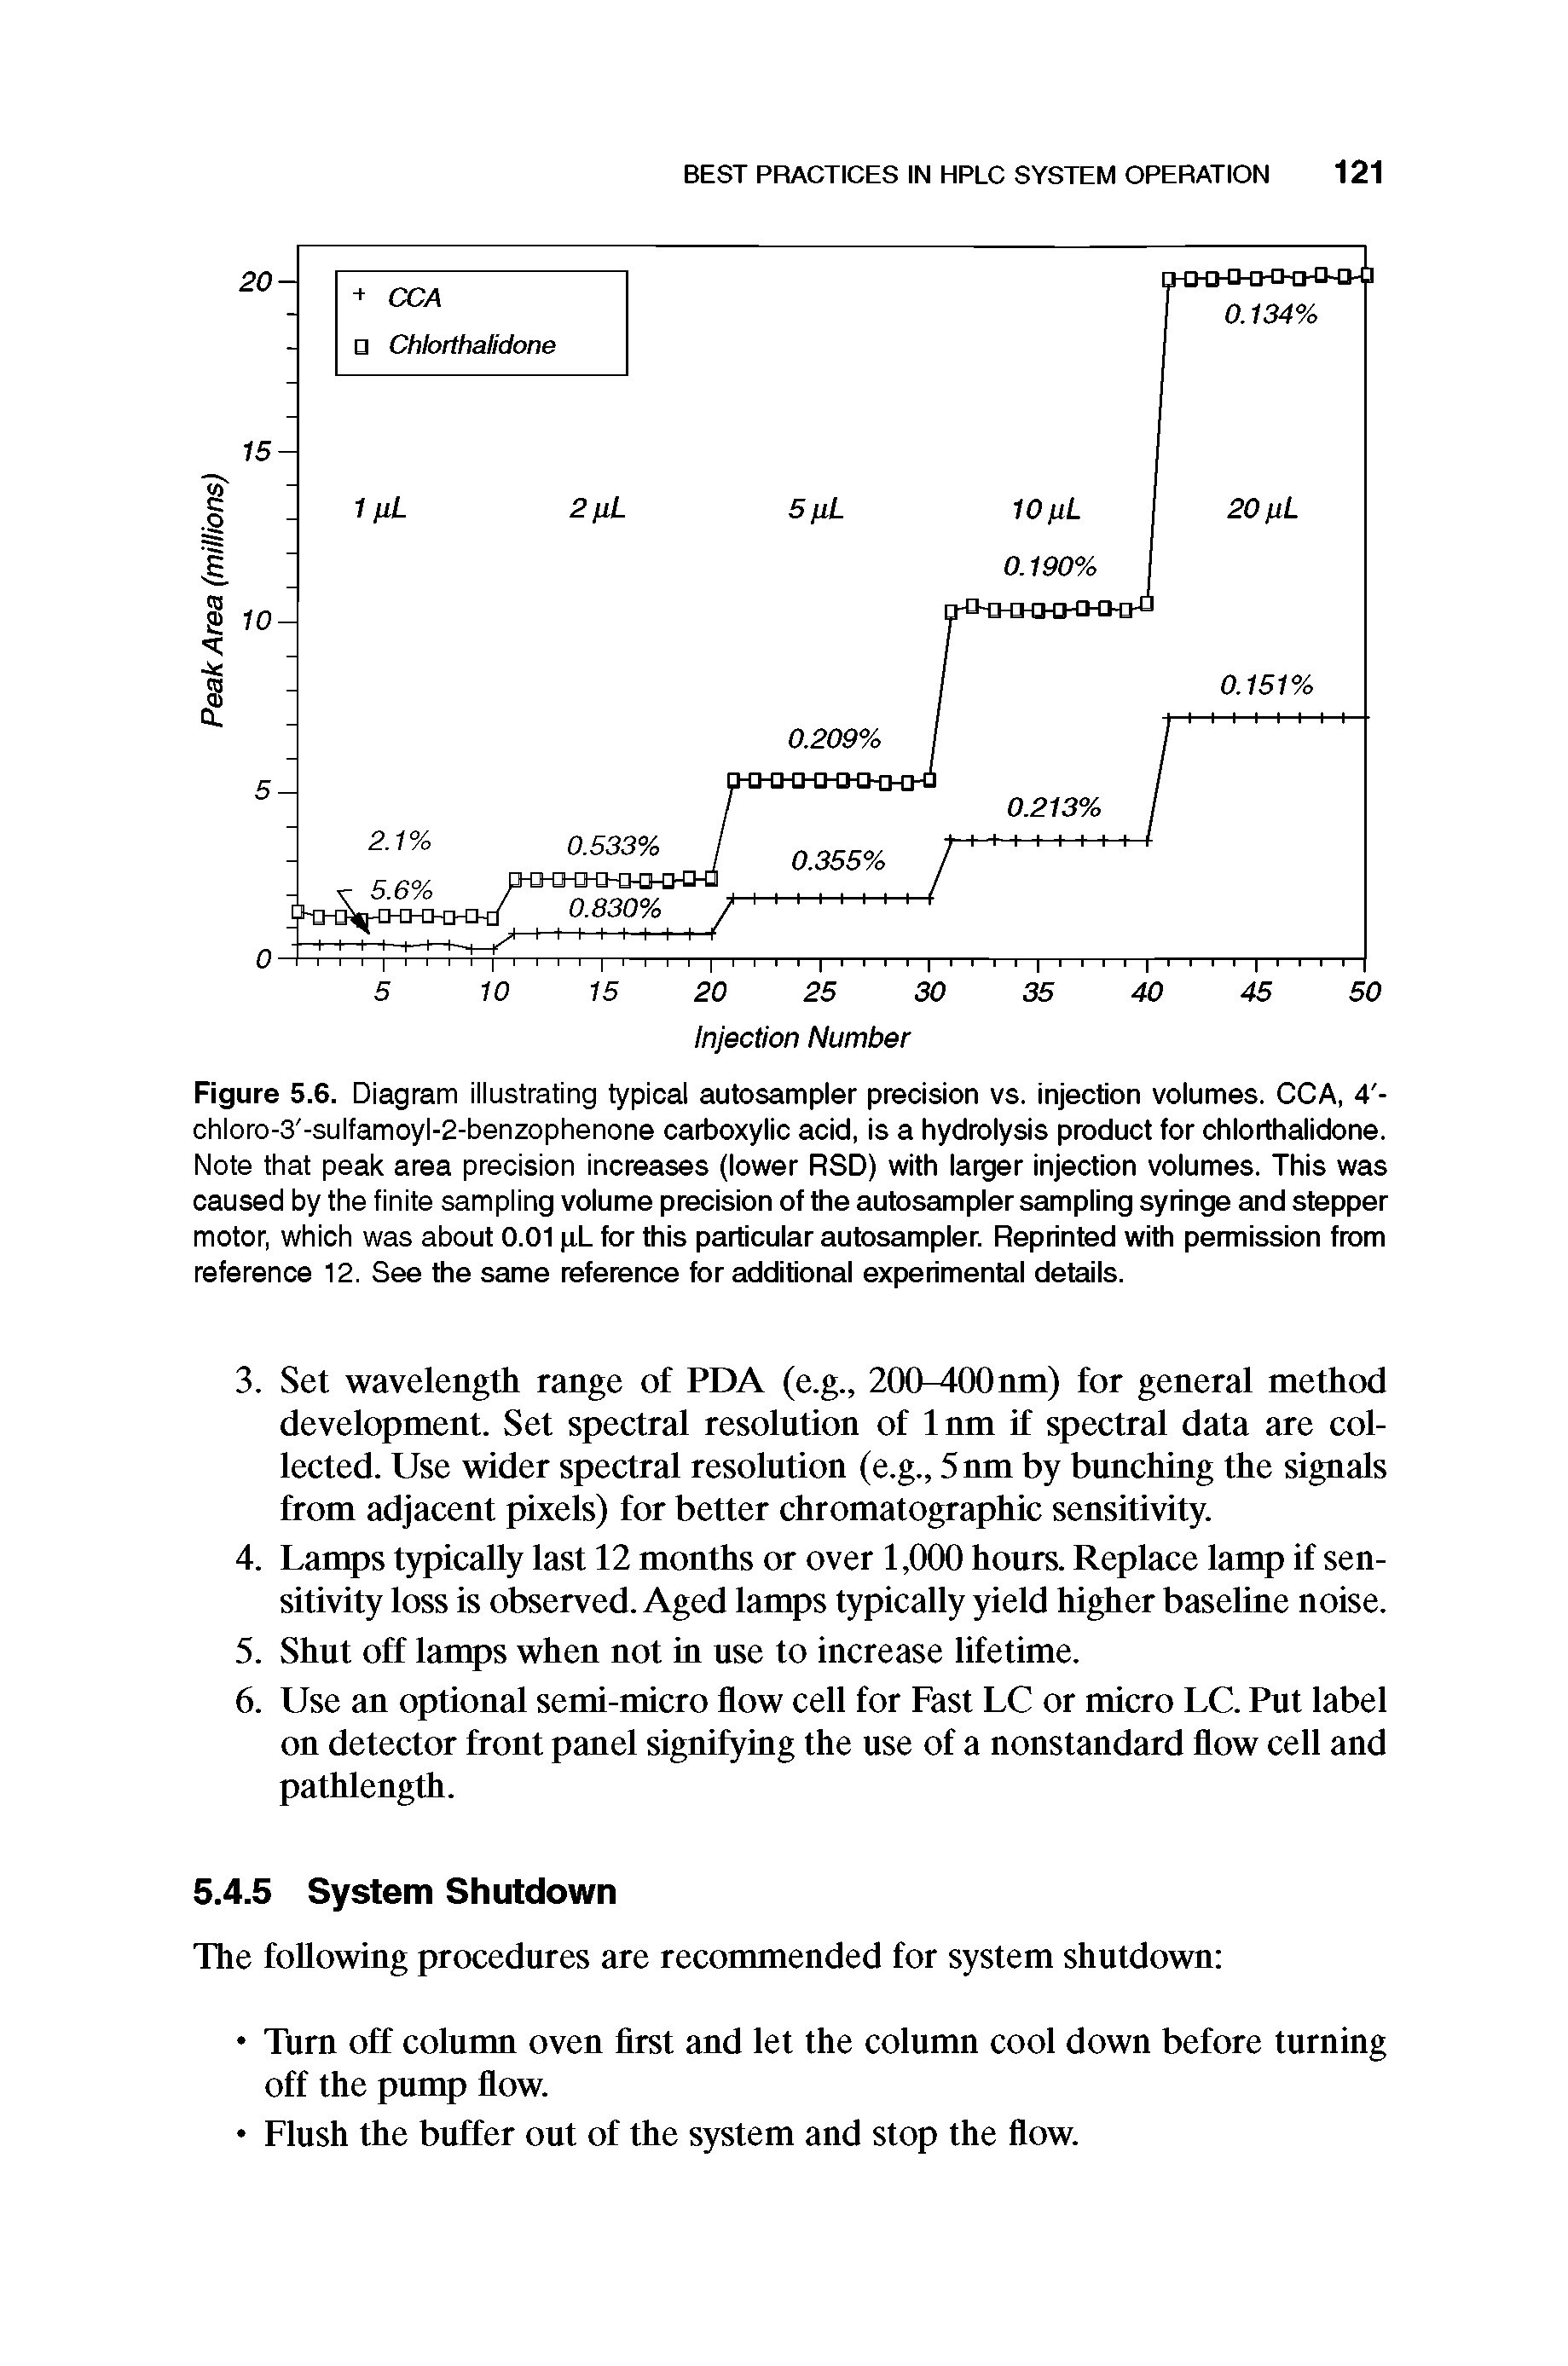 Figure 5.6. Diagram illustrating typical autosampler precision vs. injection volumes. CCA, 4 -chloro-3 -sulfamoyl-2-benzophenone carboxylic acid, is a hydrolysis product tor chlorthalidone. Note that peak area precision increases (lower RSD) with larger injection volumes. This was caused by the finite sampling volume precision of the autosampler sampling syringe and stepper motor, which was about 0.01 pL for this particular autosampler. Reprinted with permission from reference 12. See the same reference for additional experimental details.